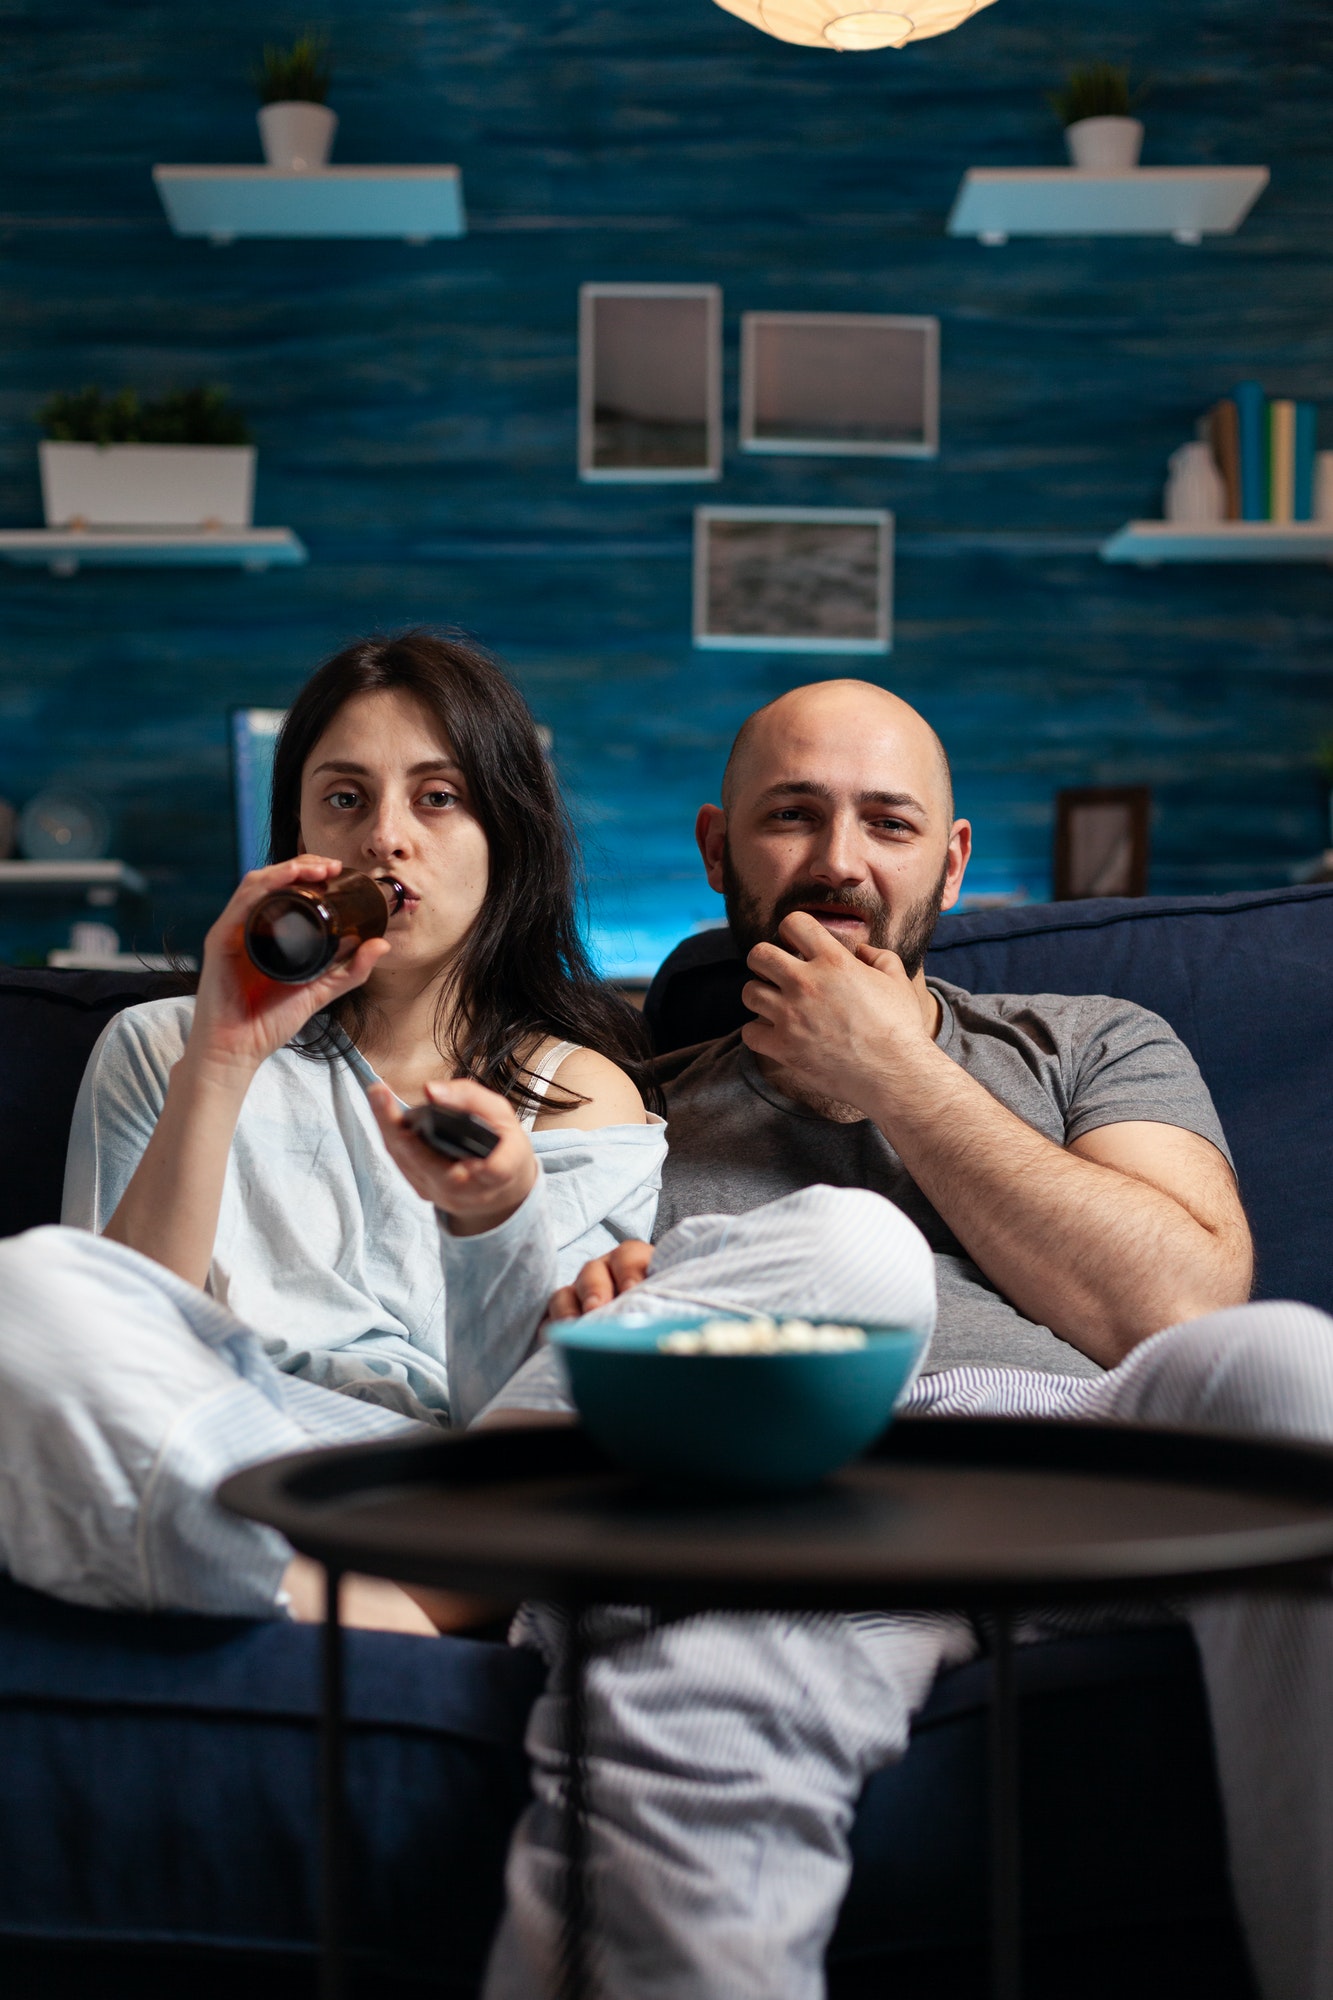 Relaxed excited couple watching TV on couch relaxing late at night